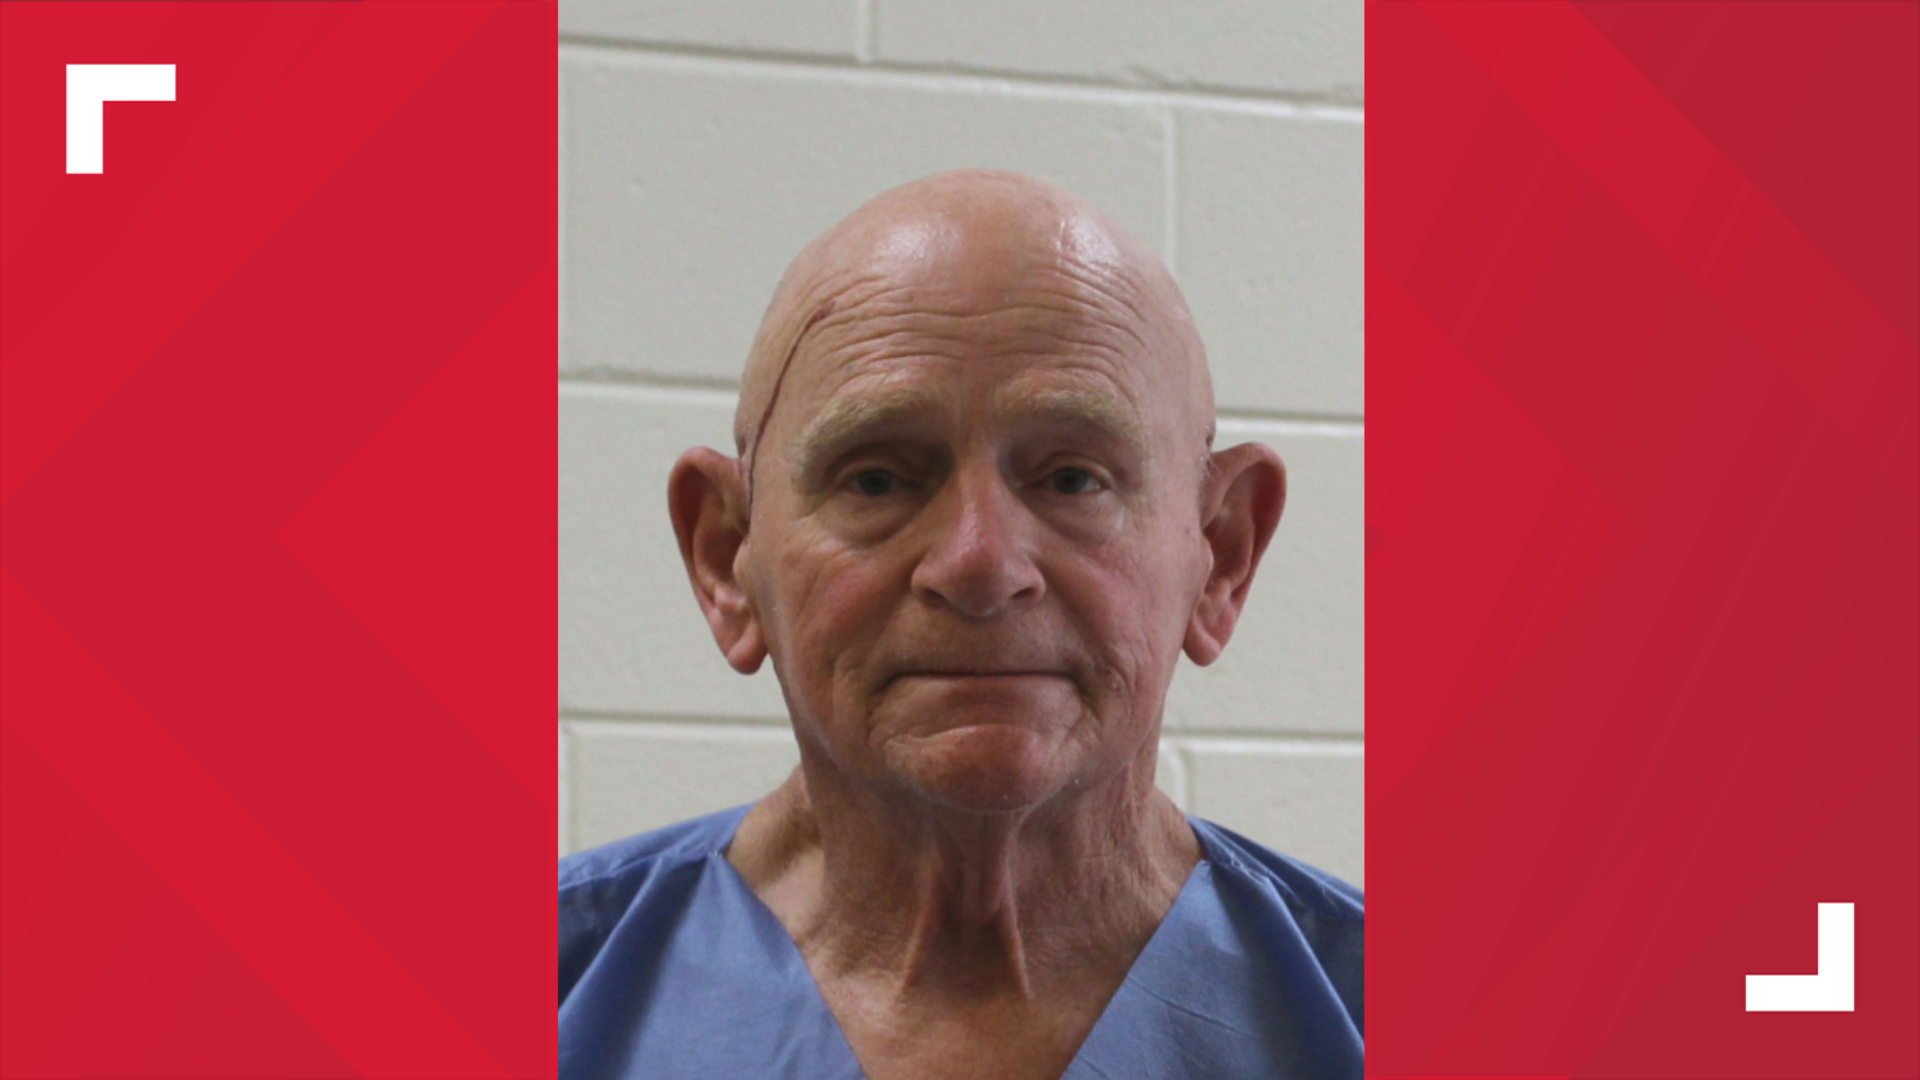 According to the Houston County Sheriff's Office, 78-year-old Harold Seidenfaden told a neighbor he'd had an argument with his wife and killed her.